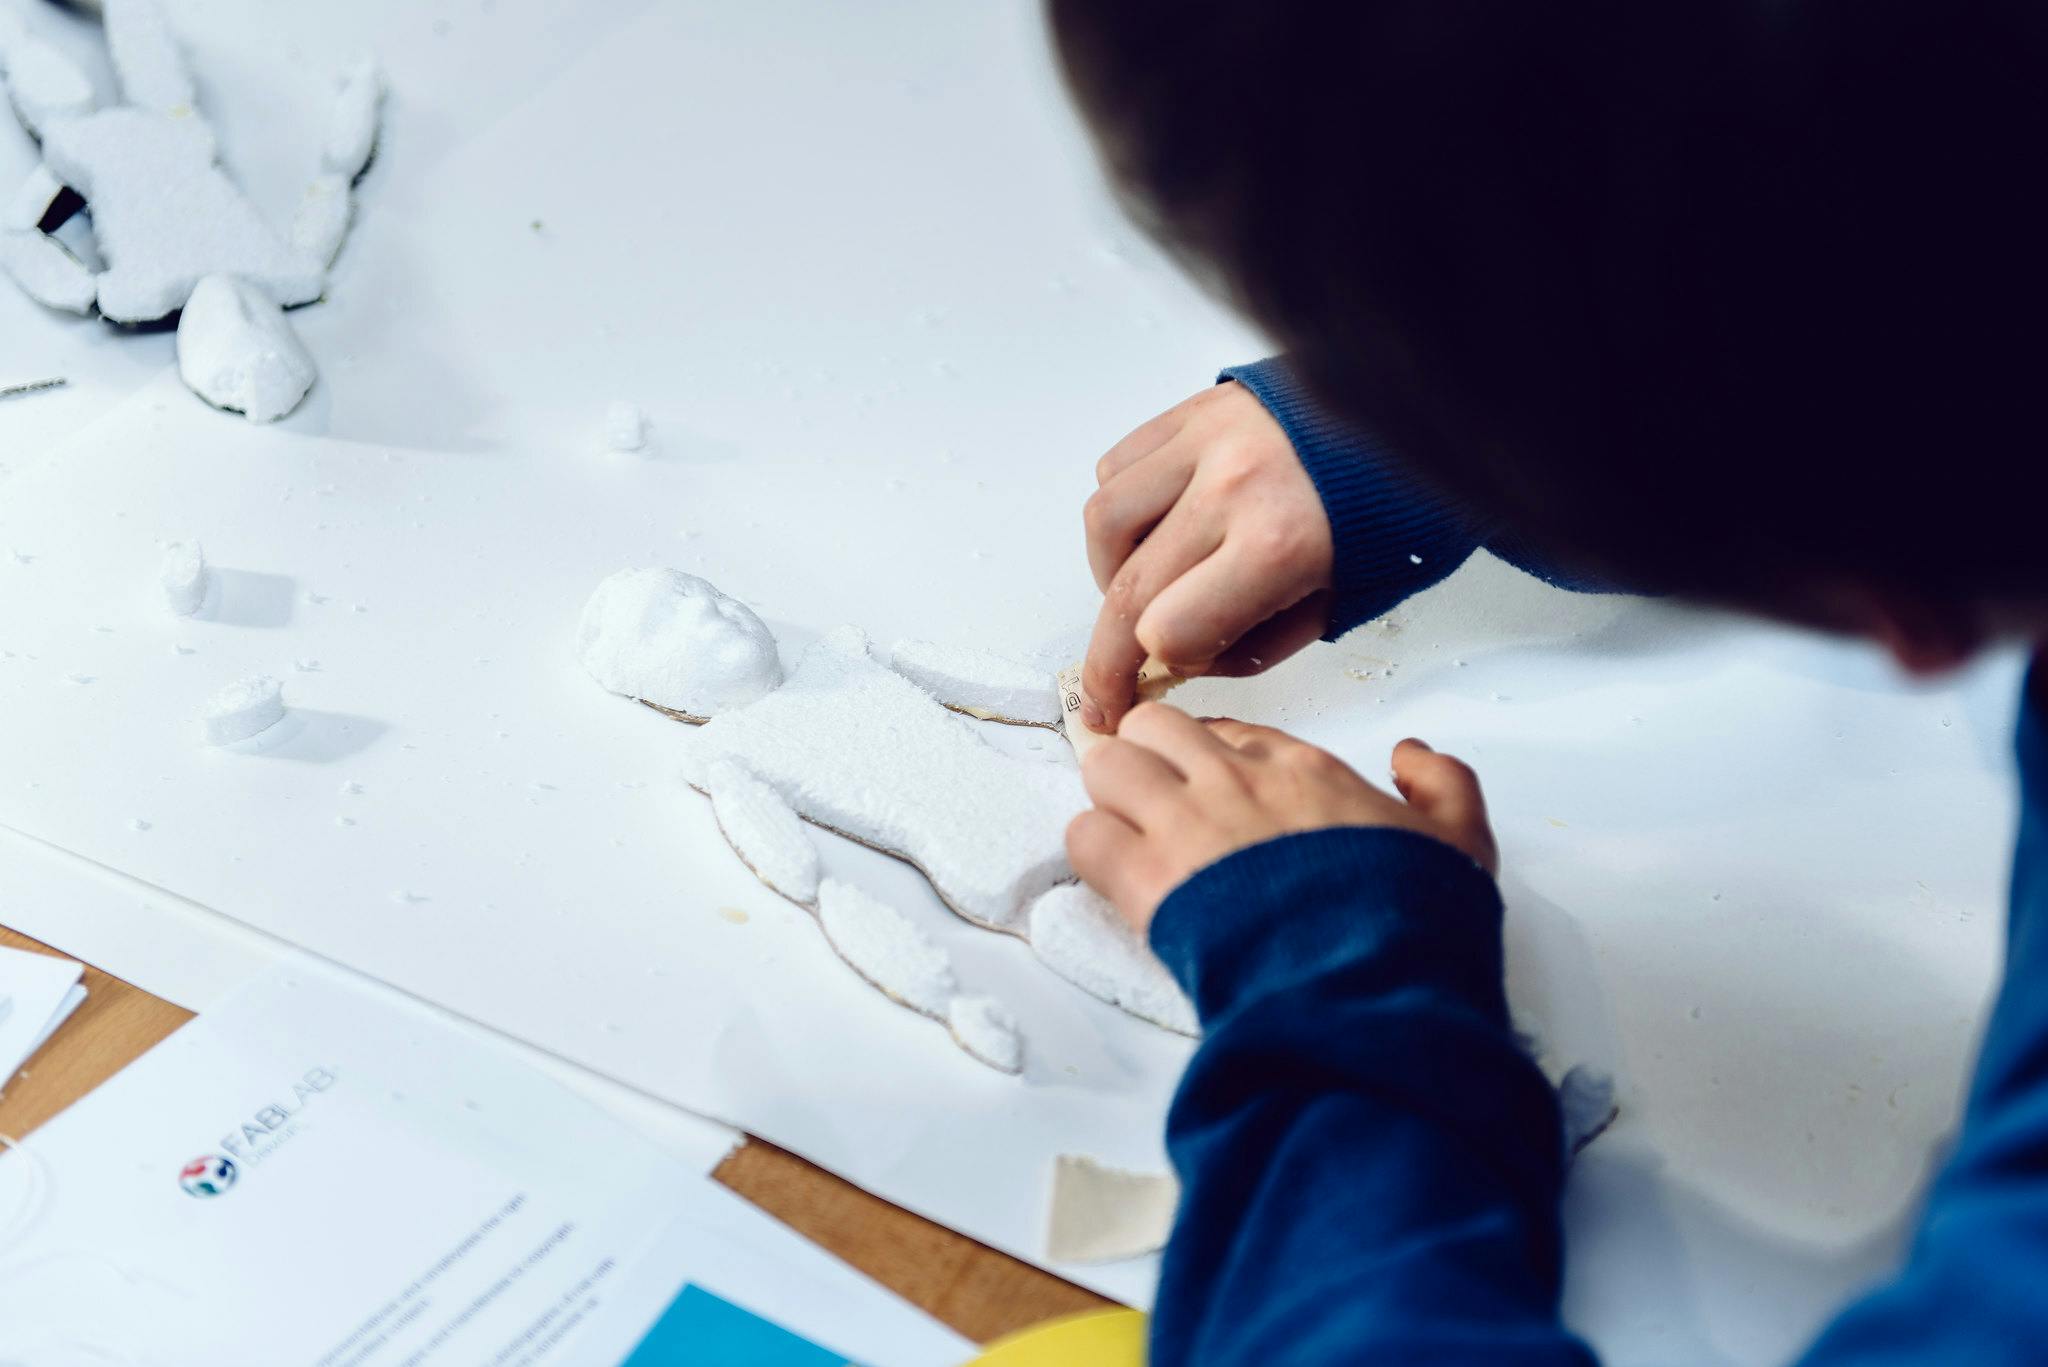 A young boys hands are shown making a 3D printed puppet on a table.